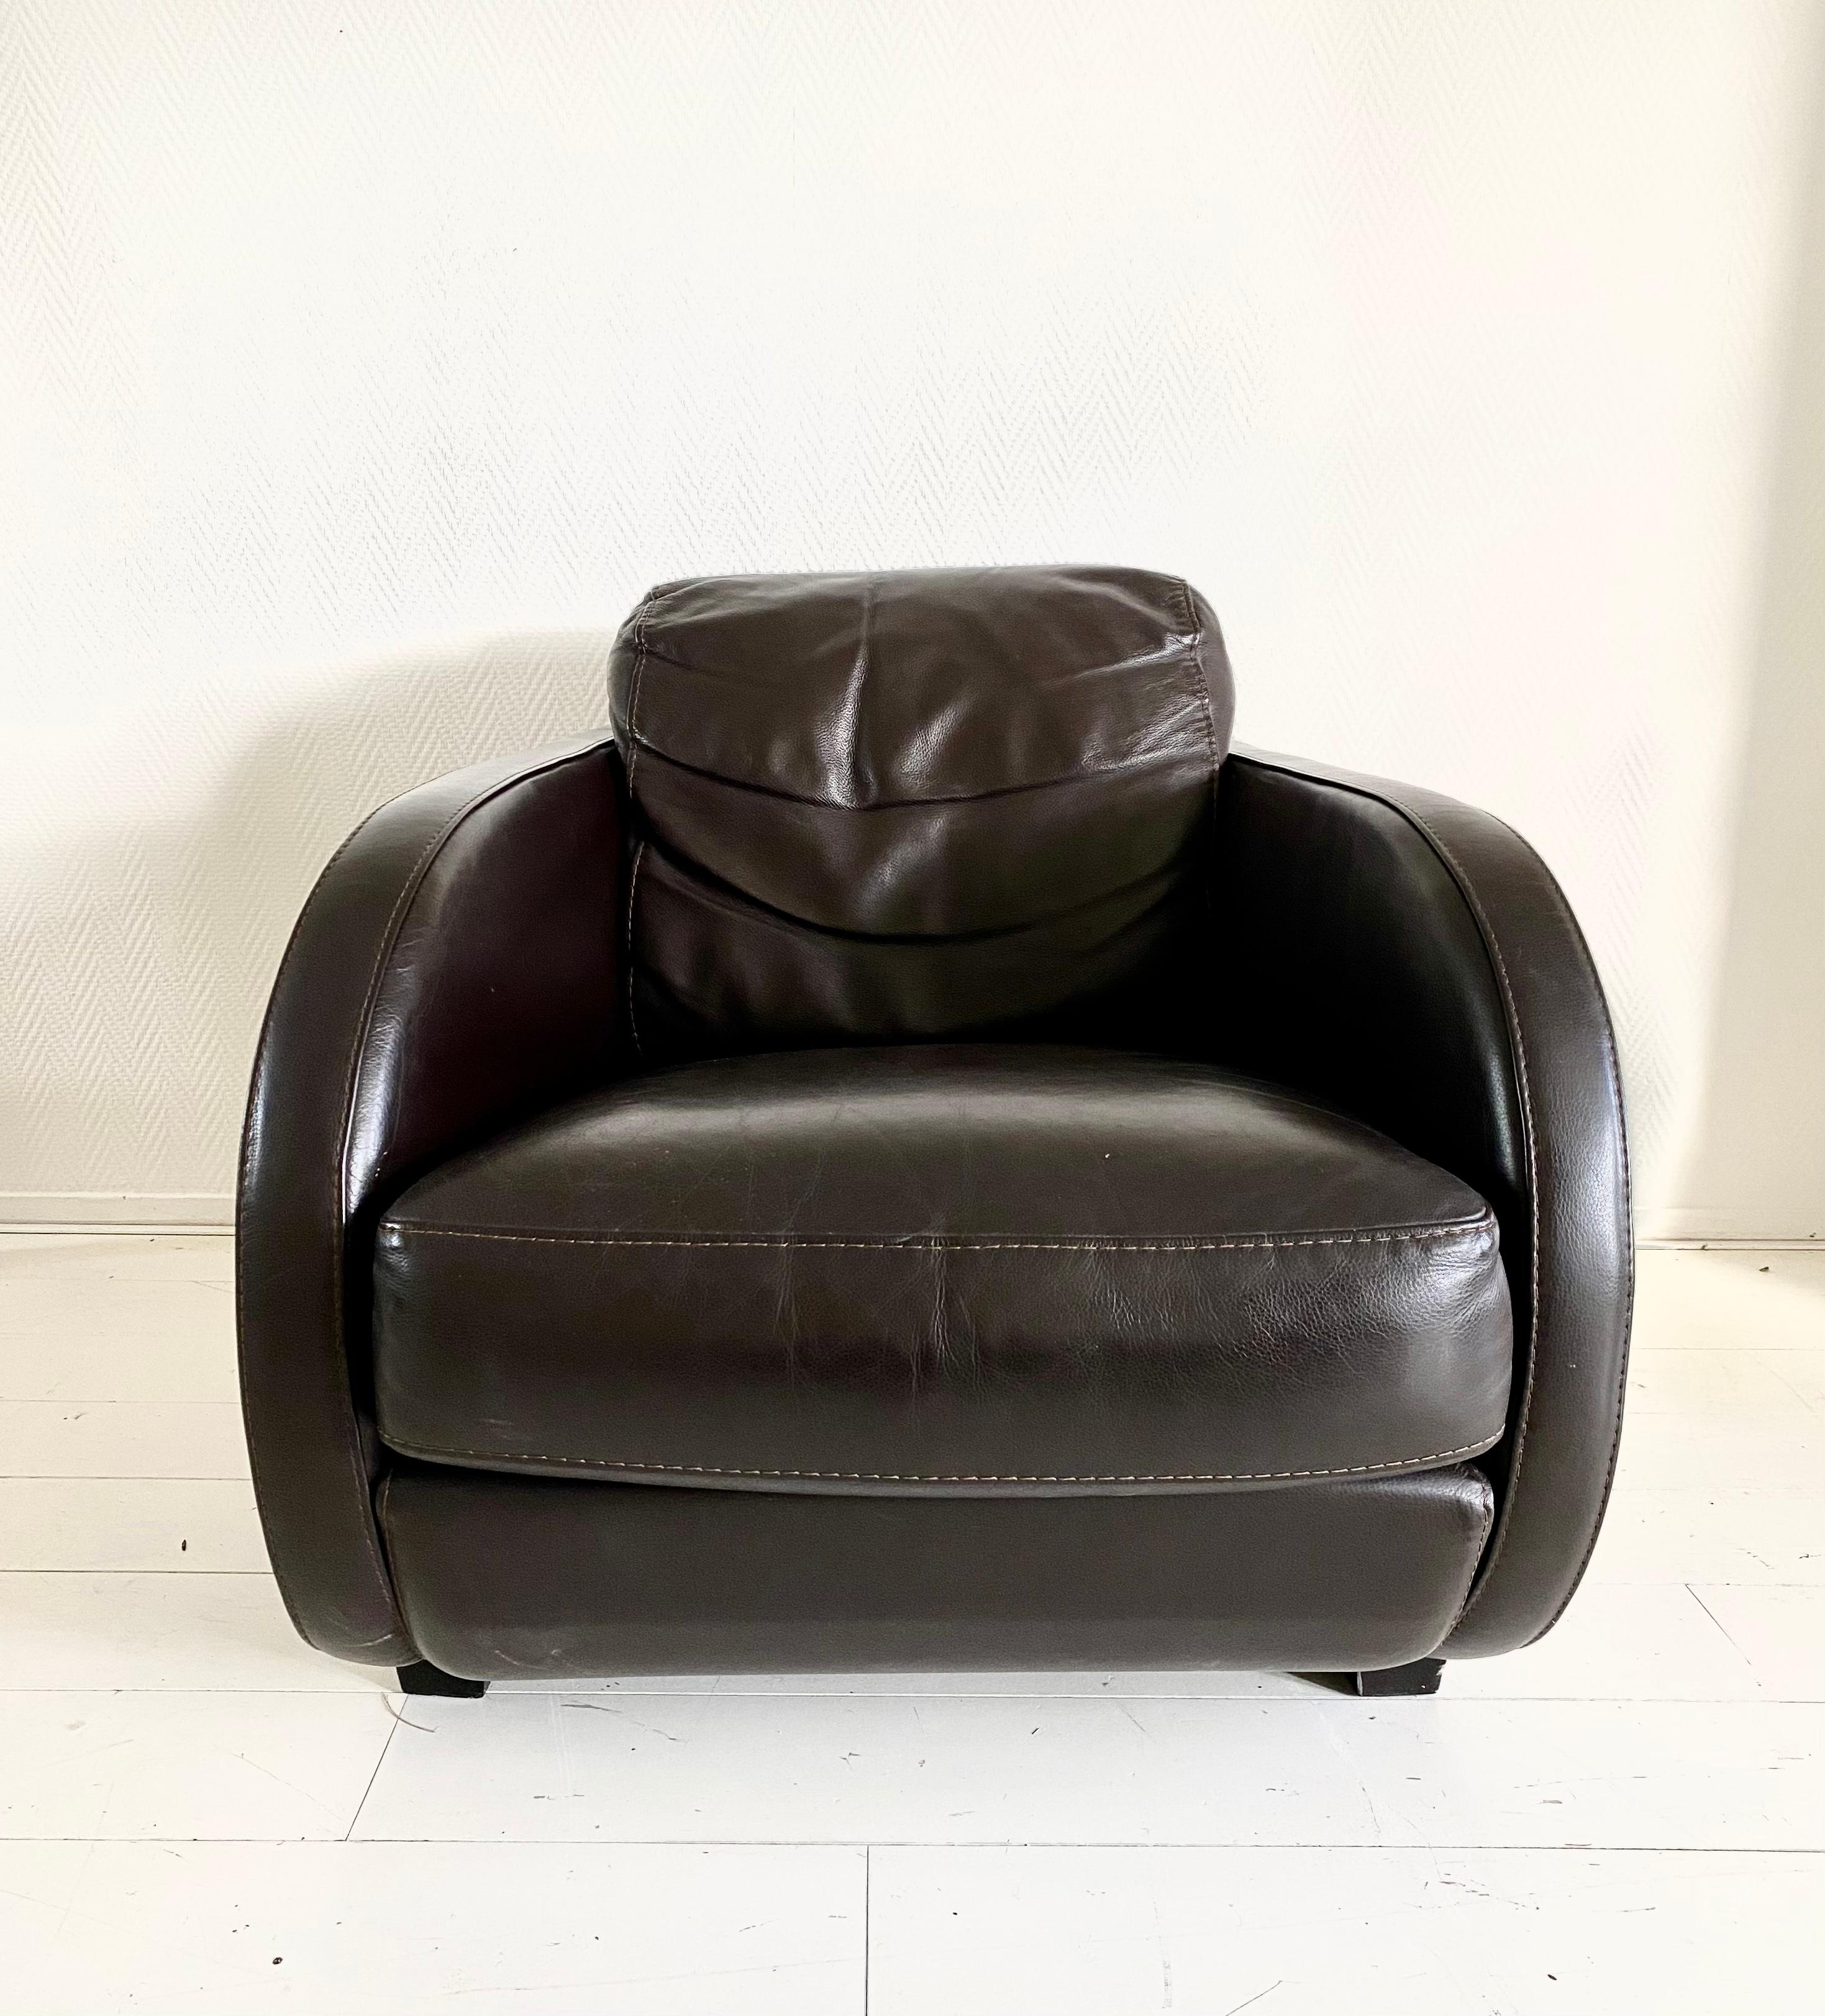 This exclusive lounge fauteuil was manufactured by Roche Bobois. It features a thick Brown leather upholstery, offers a highly comfortable seat and shows a typical Art Deco look. The chair remains in very good condition with some signs of age and